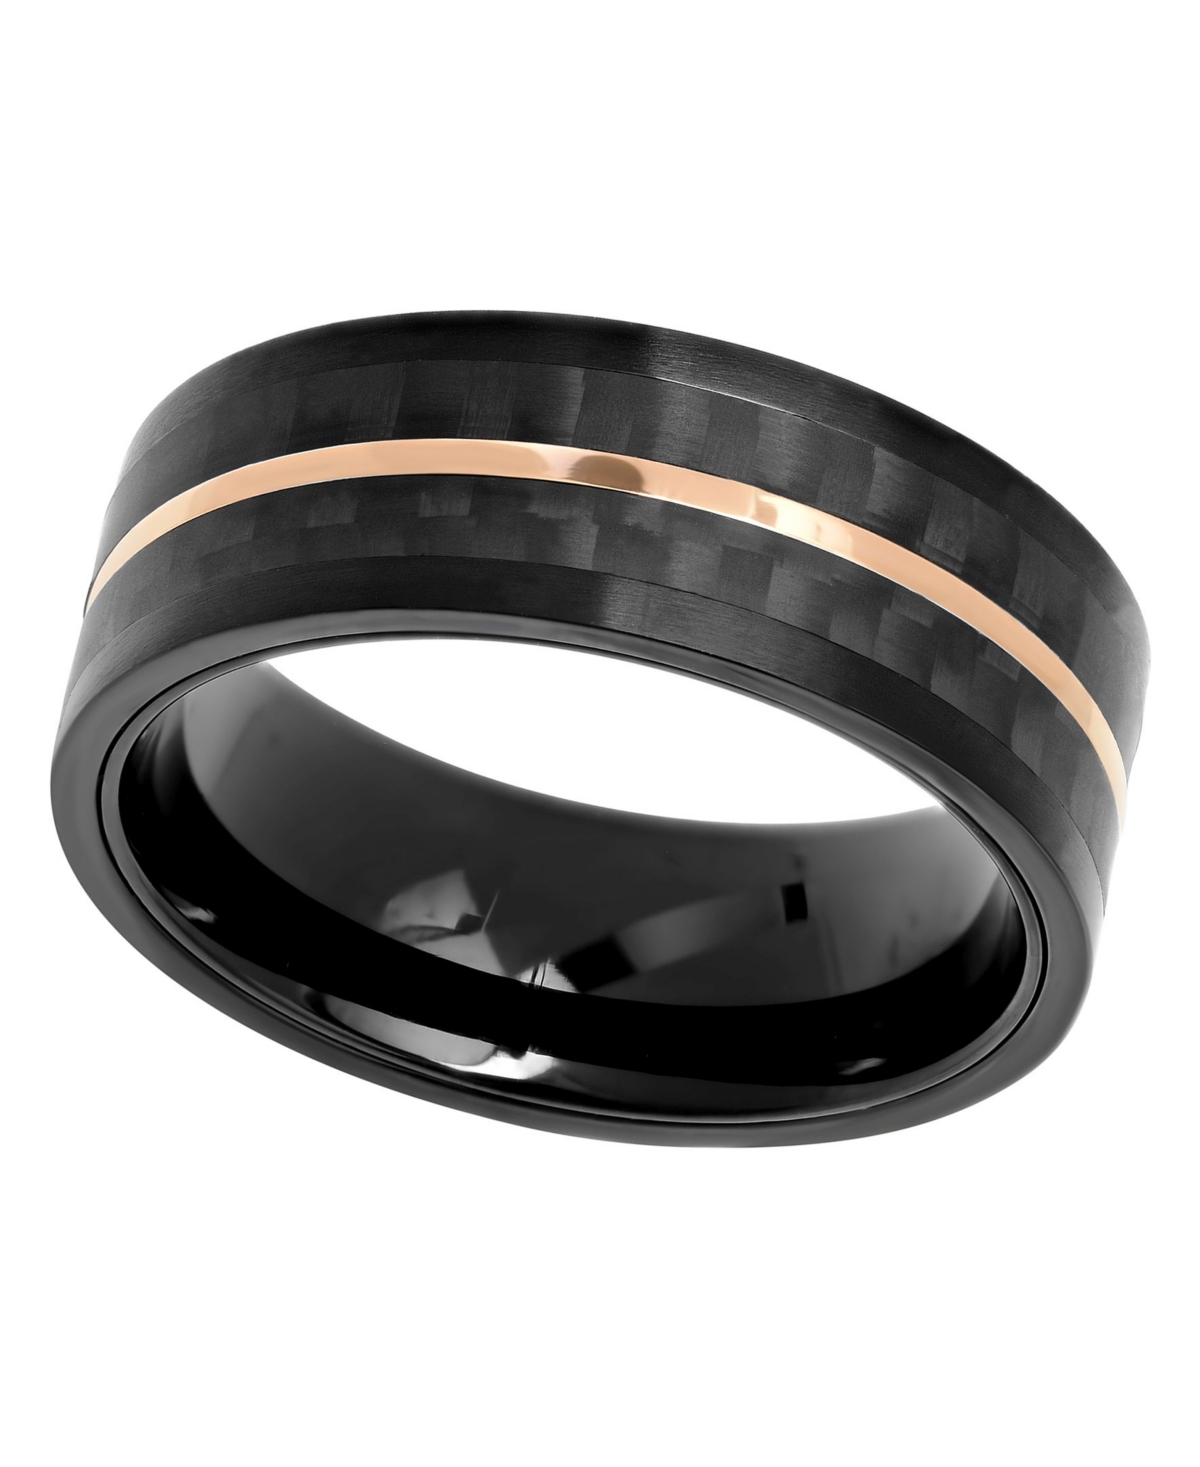 C & c Jewelry Macy's Men's Modern Two-Tone Stainless Steel Wedding Band